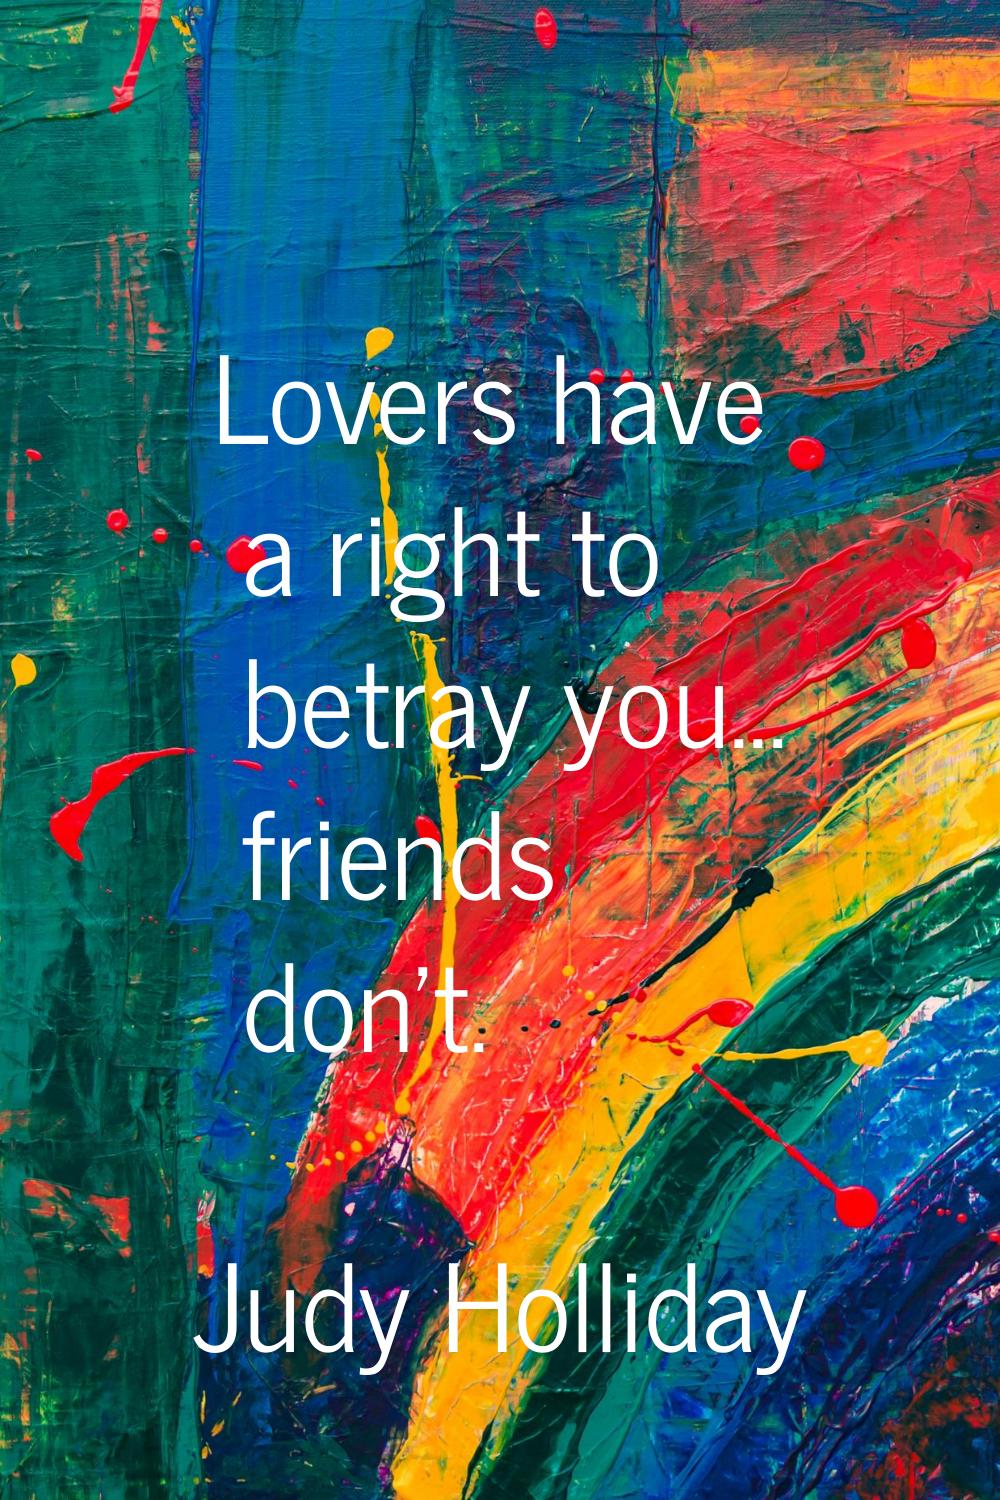 Lovers have a right to betray you... friends don't.